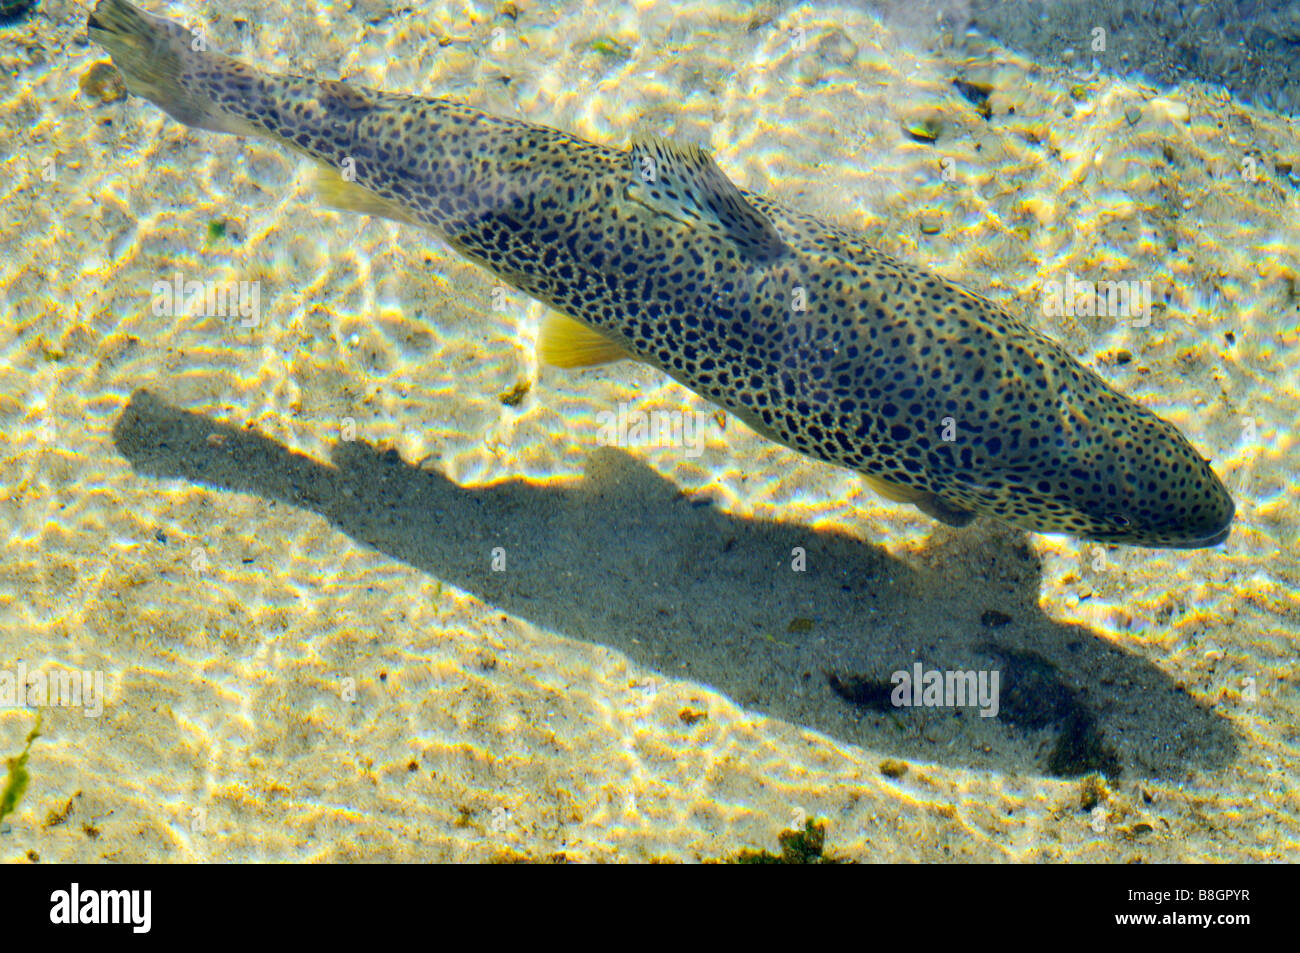 'Brown trout' 'Salmo trutta' swimming in water over sandy bottom with sunlight reflections Stock Photo